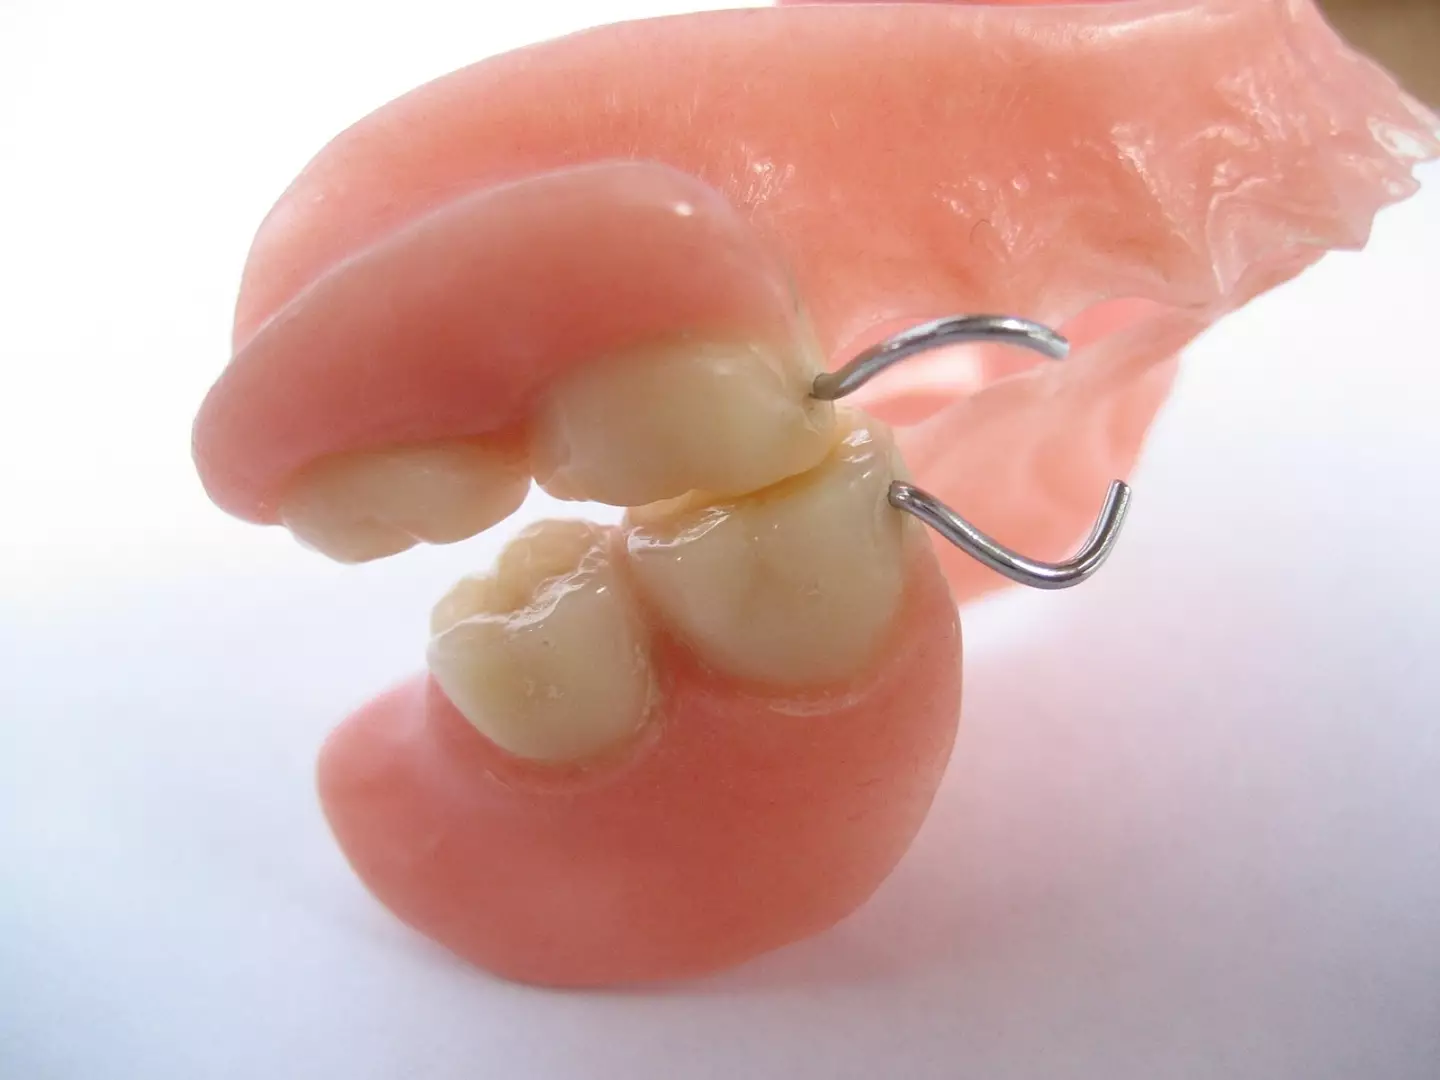 One caller got in touch after losing their dentures.